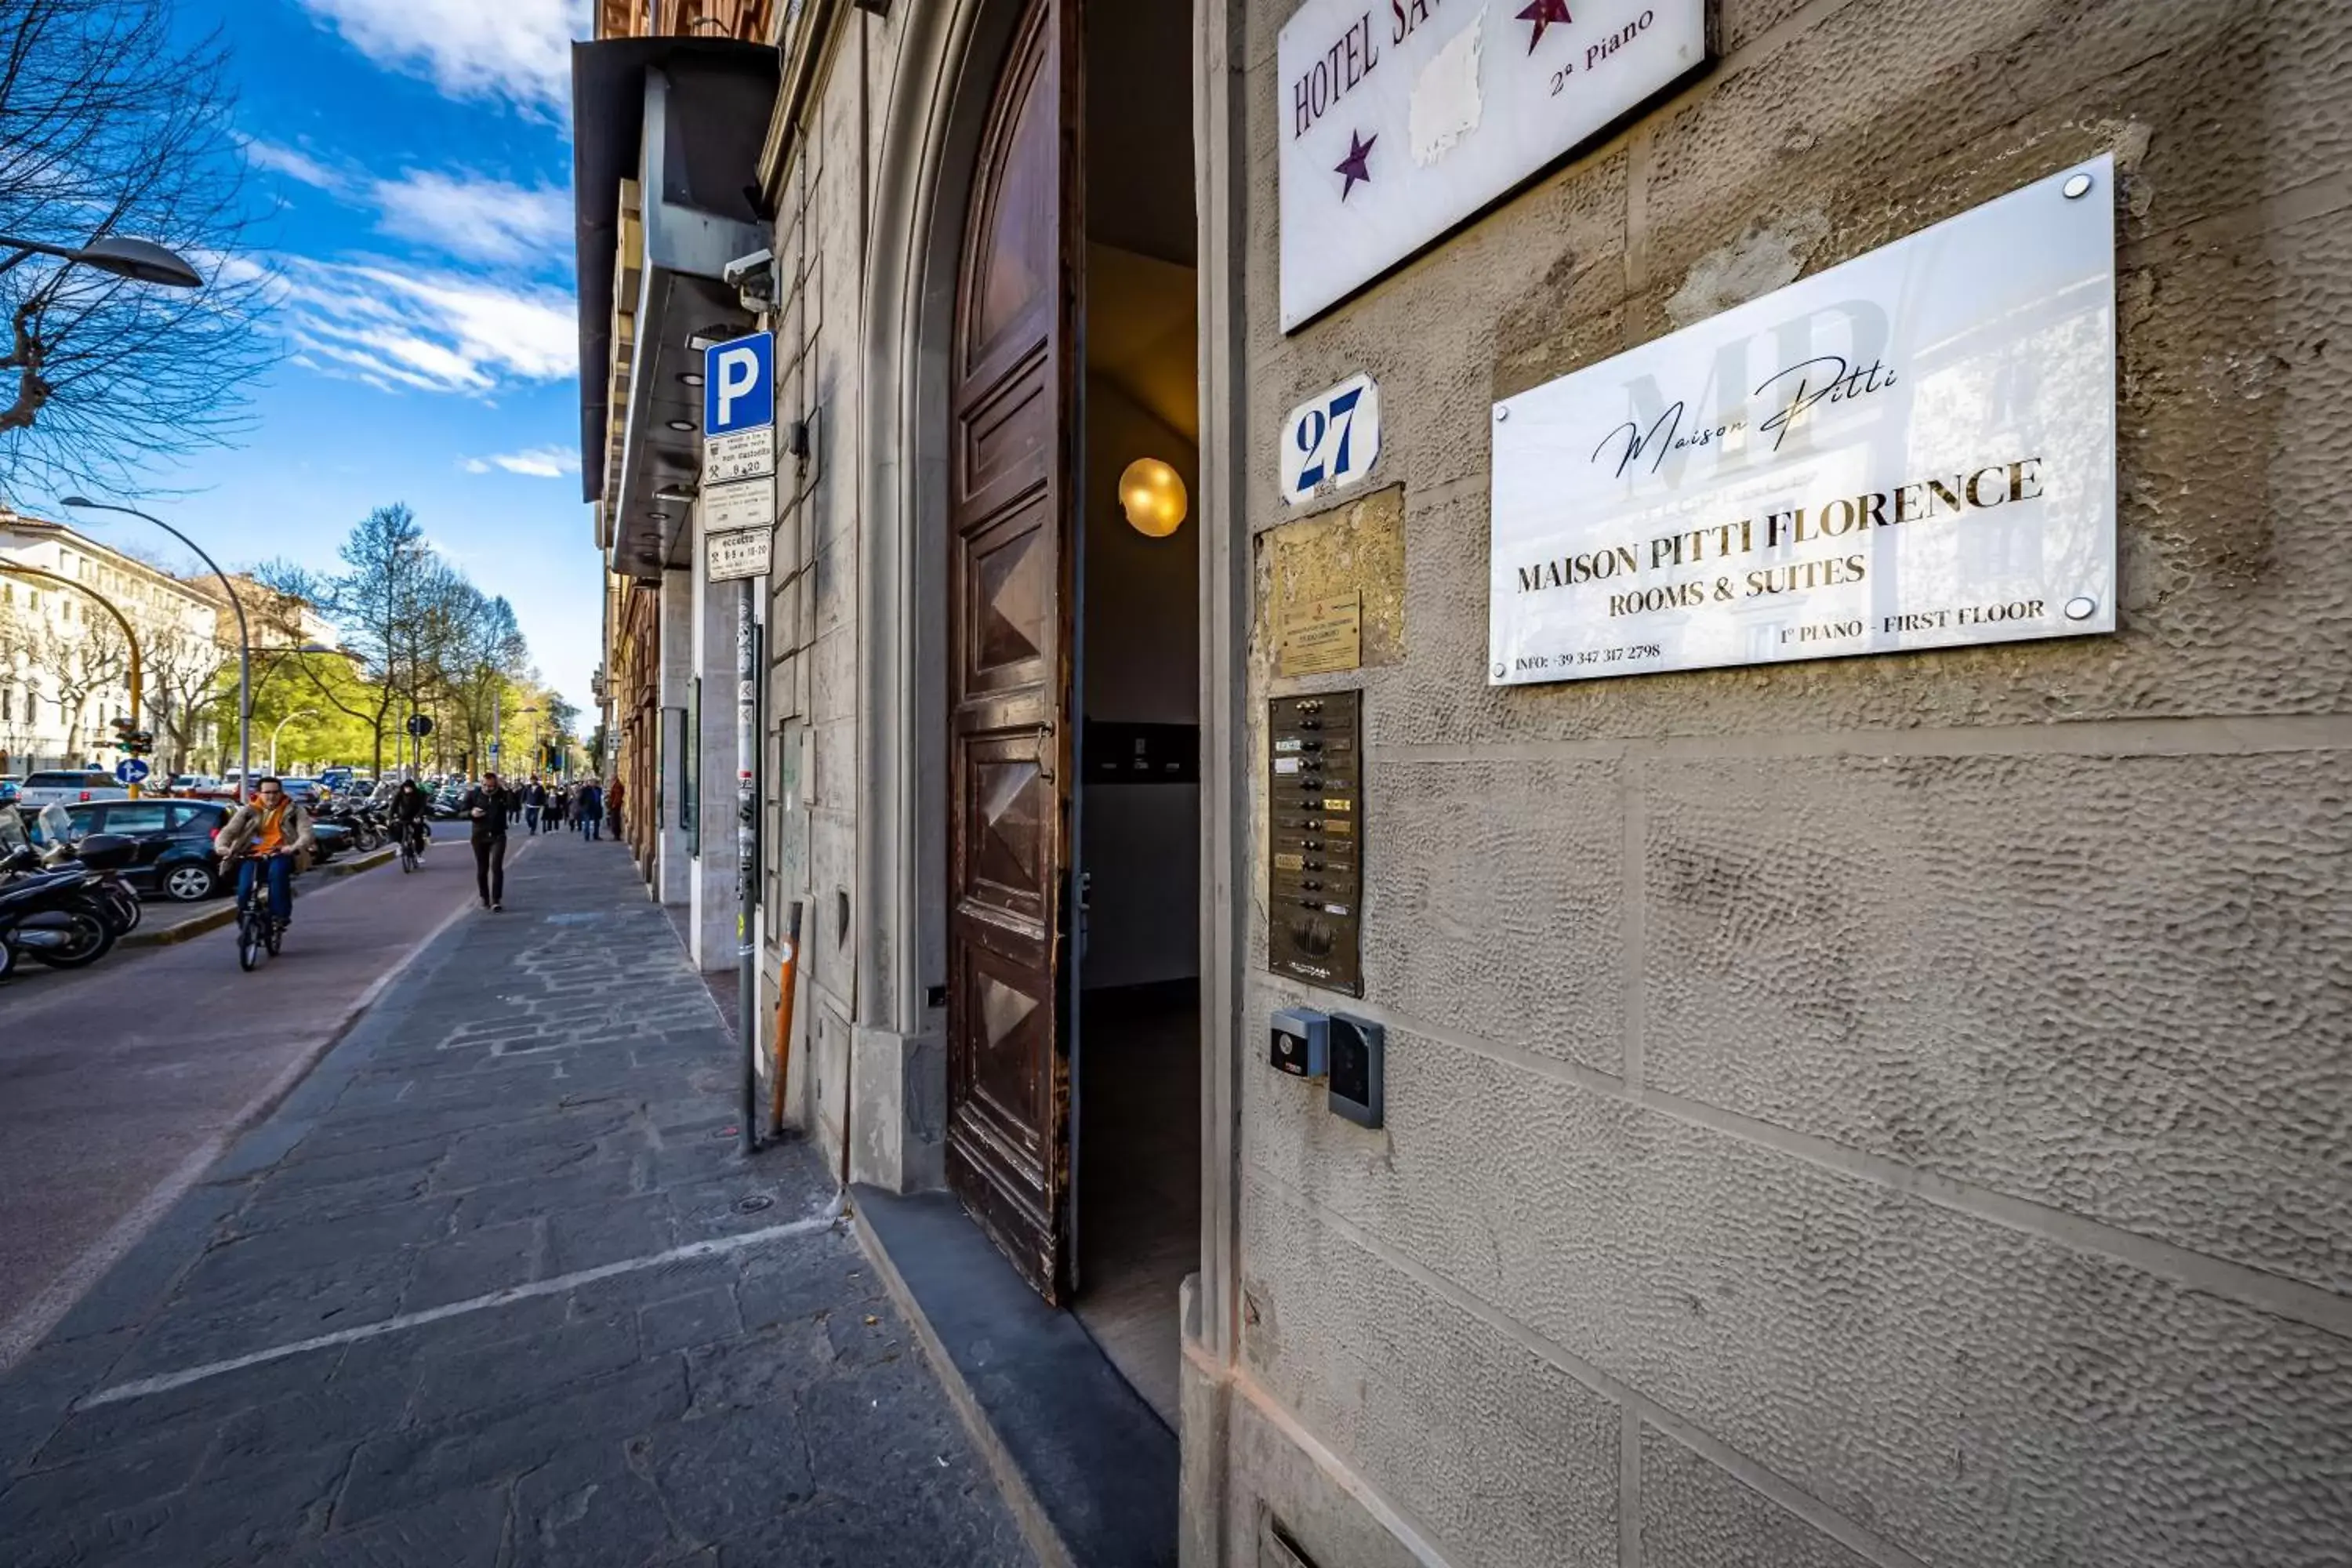 Location in Maison Pitti Florence